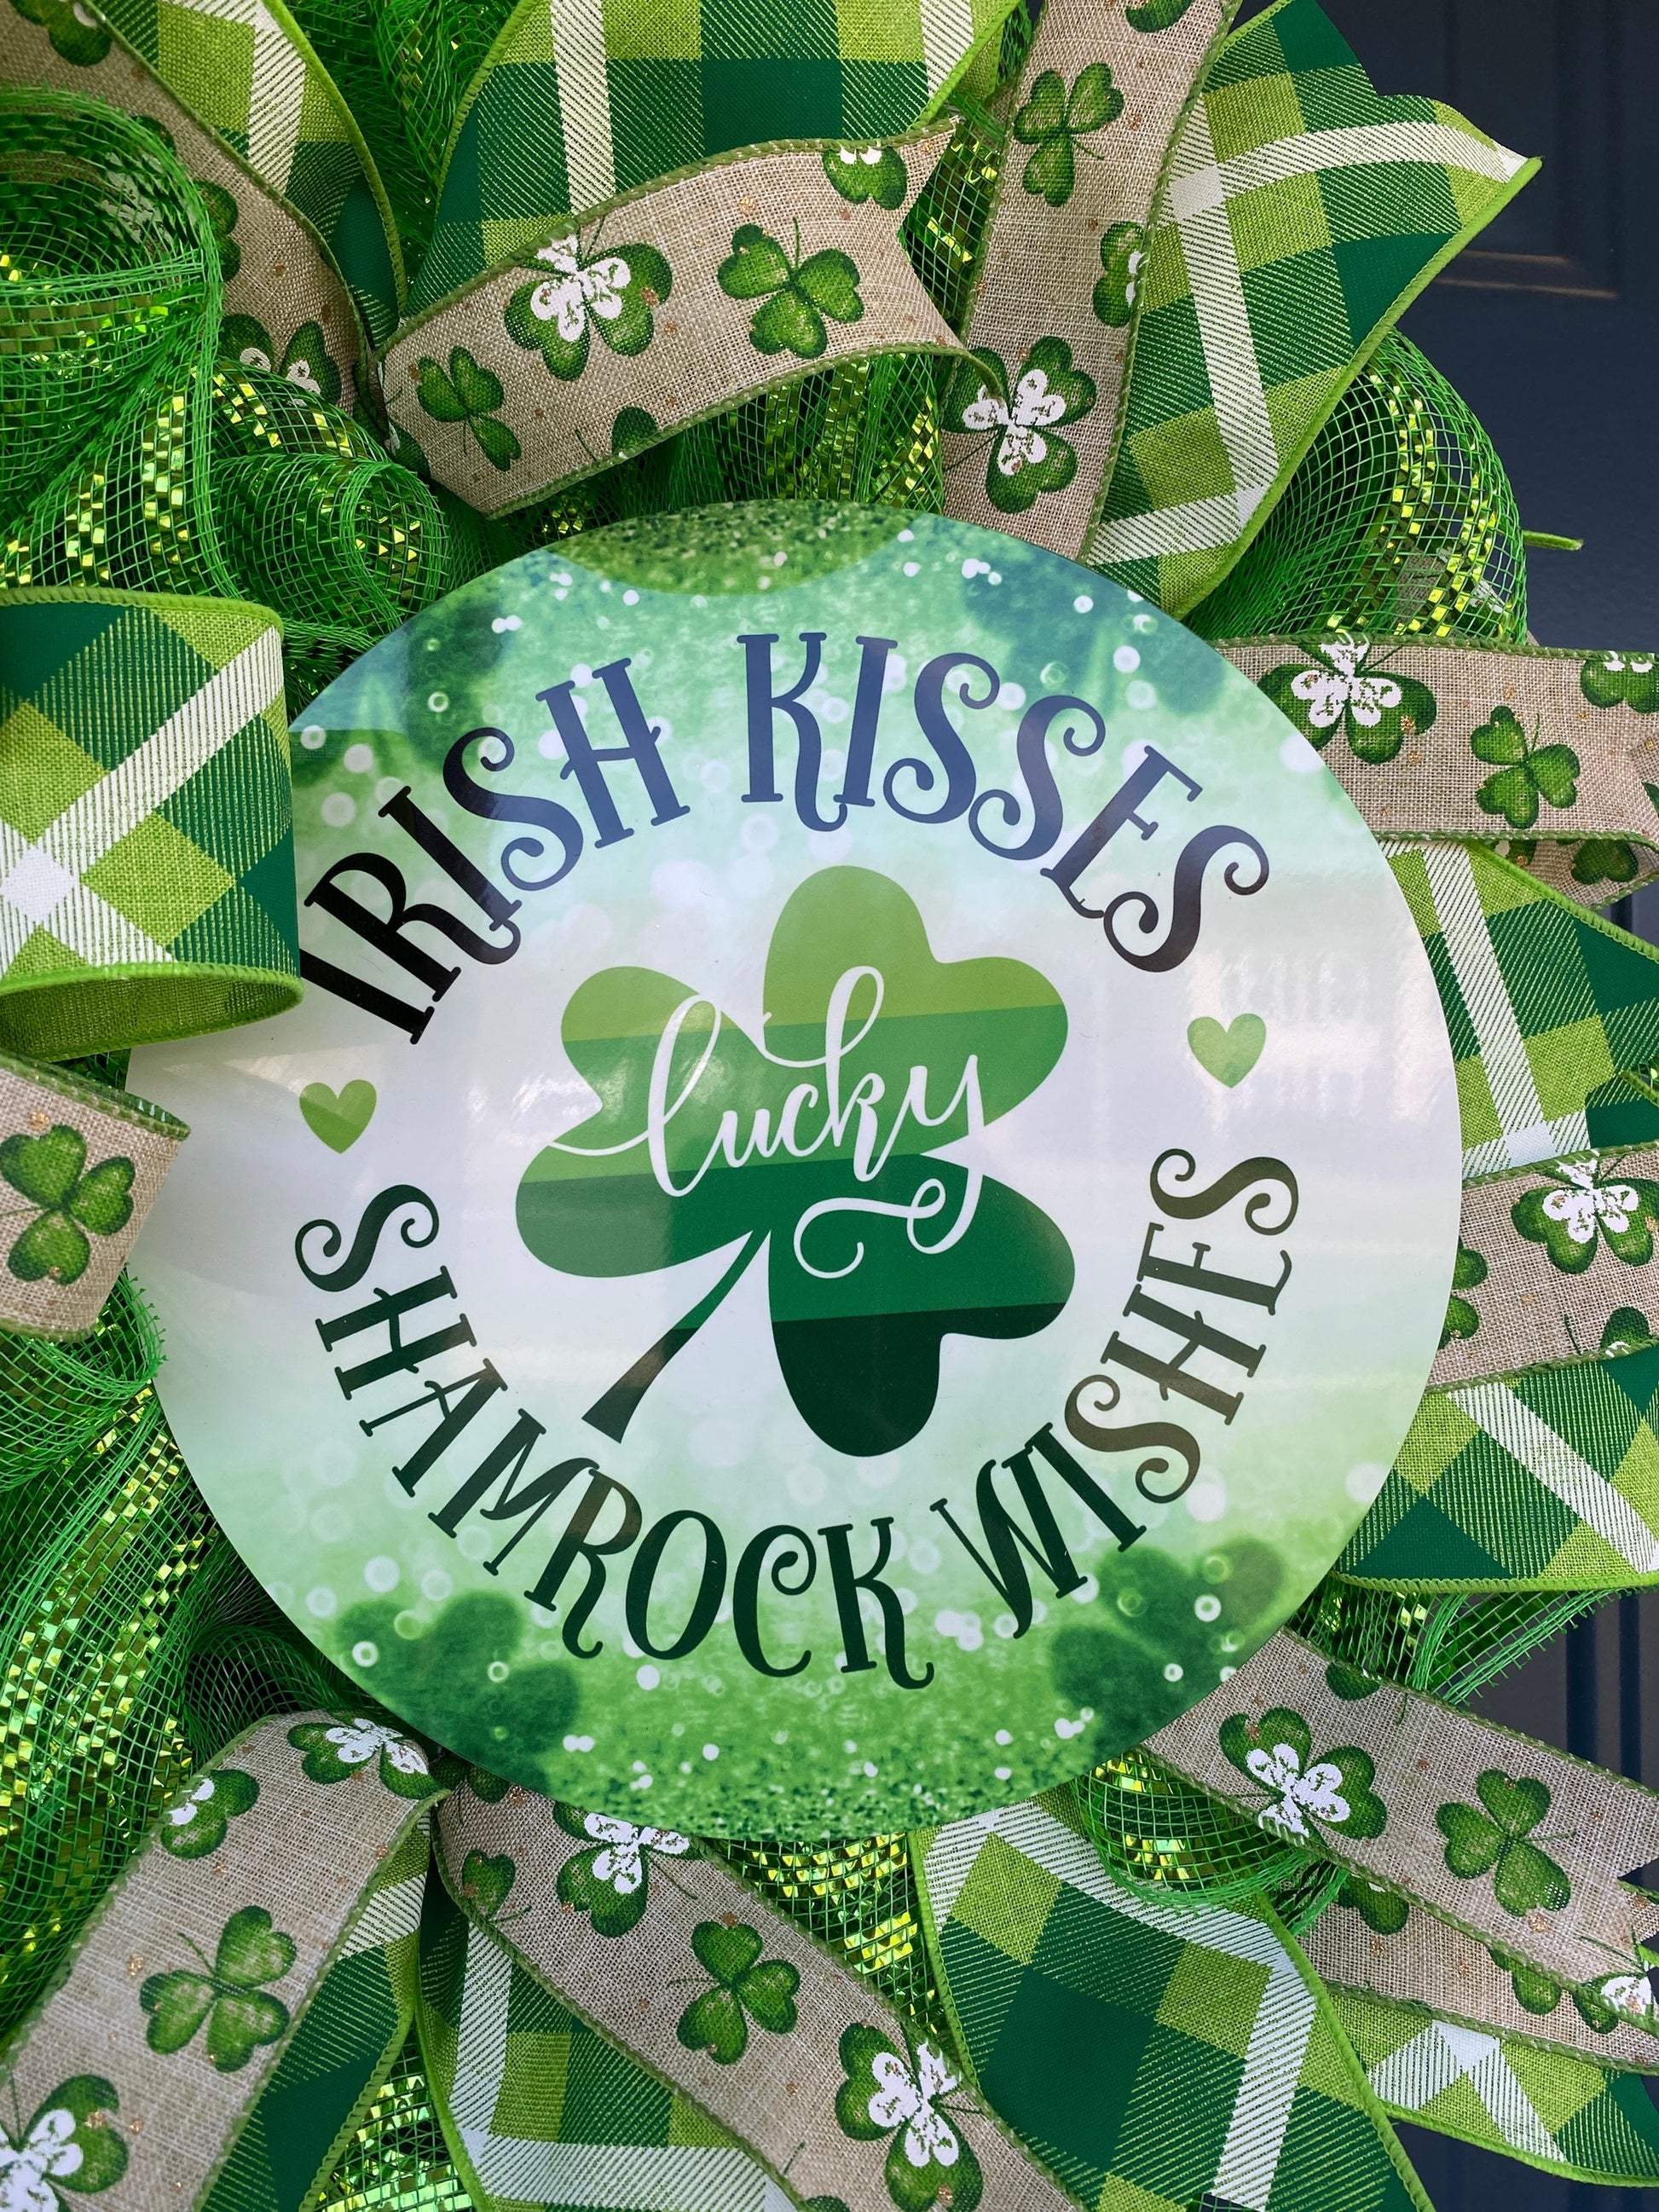 St Patrick's Day Shamrock Wreath for Front Door, Irish Welcome Decoration, Green and White Irish Kisses Shamrock Wishes Wreath